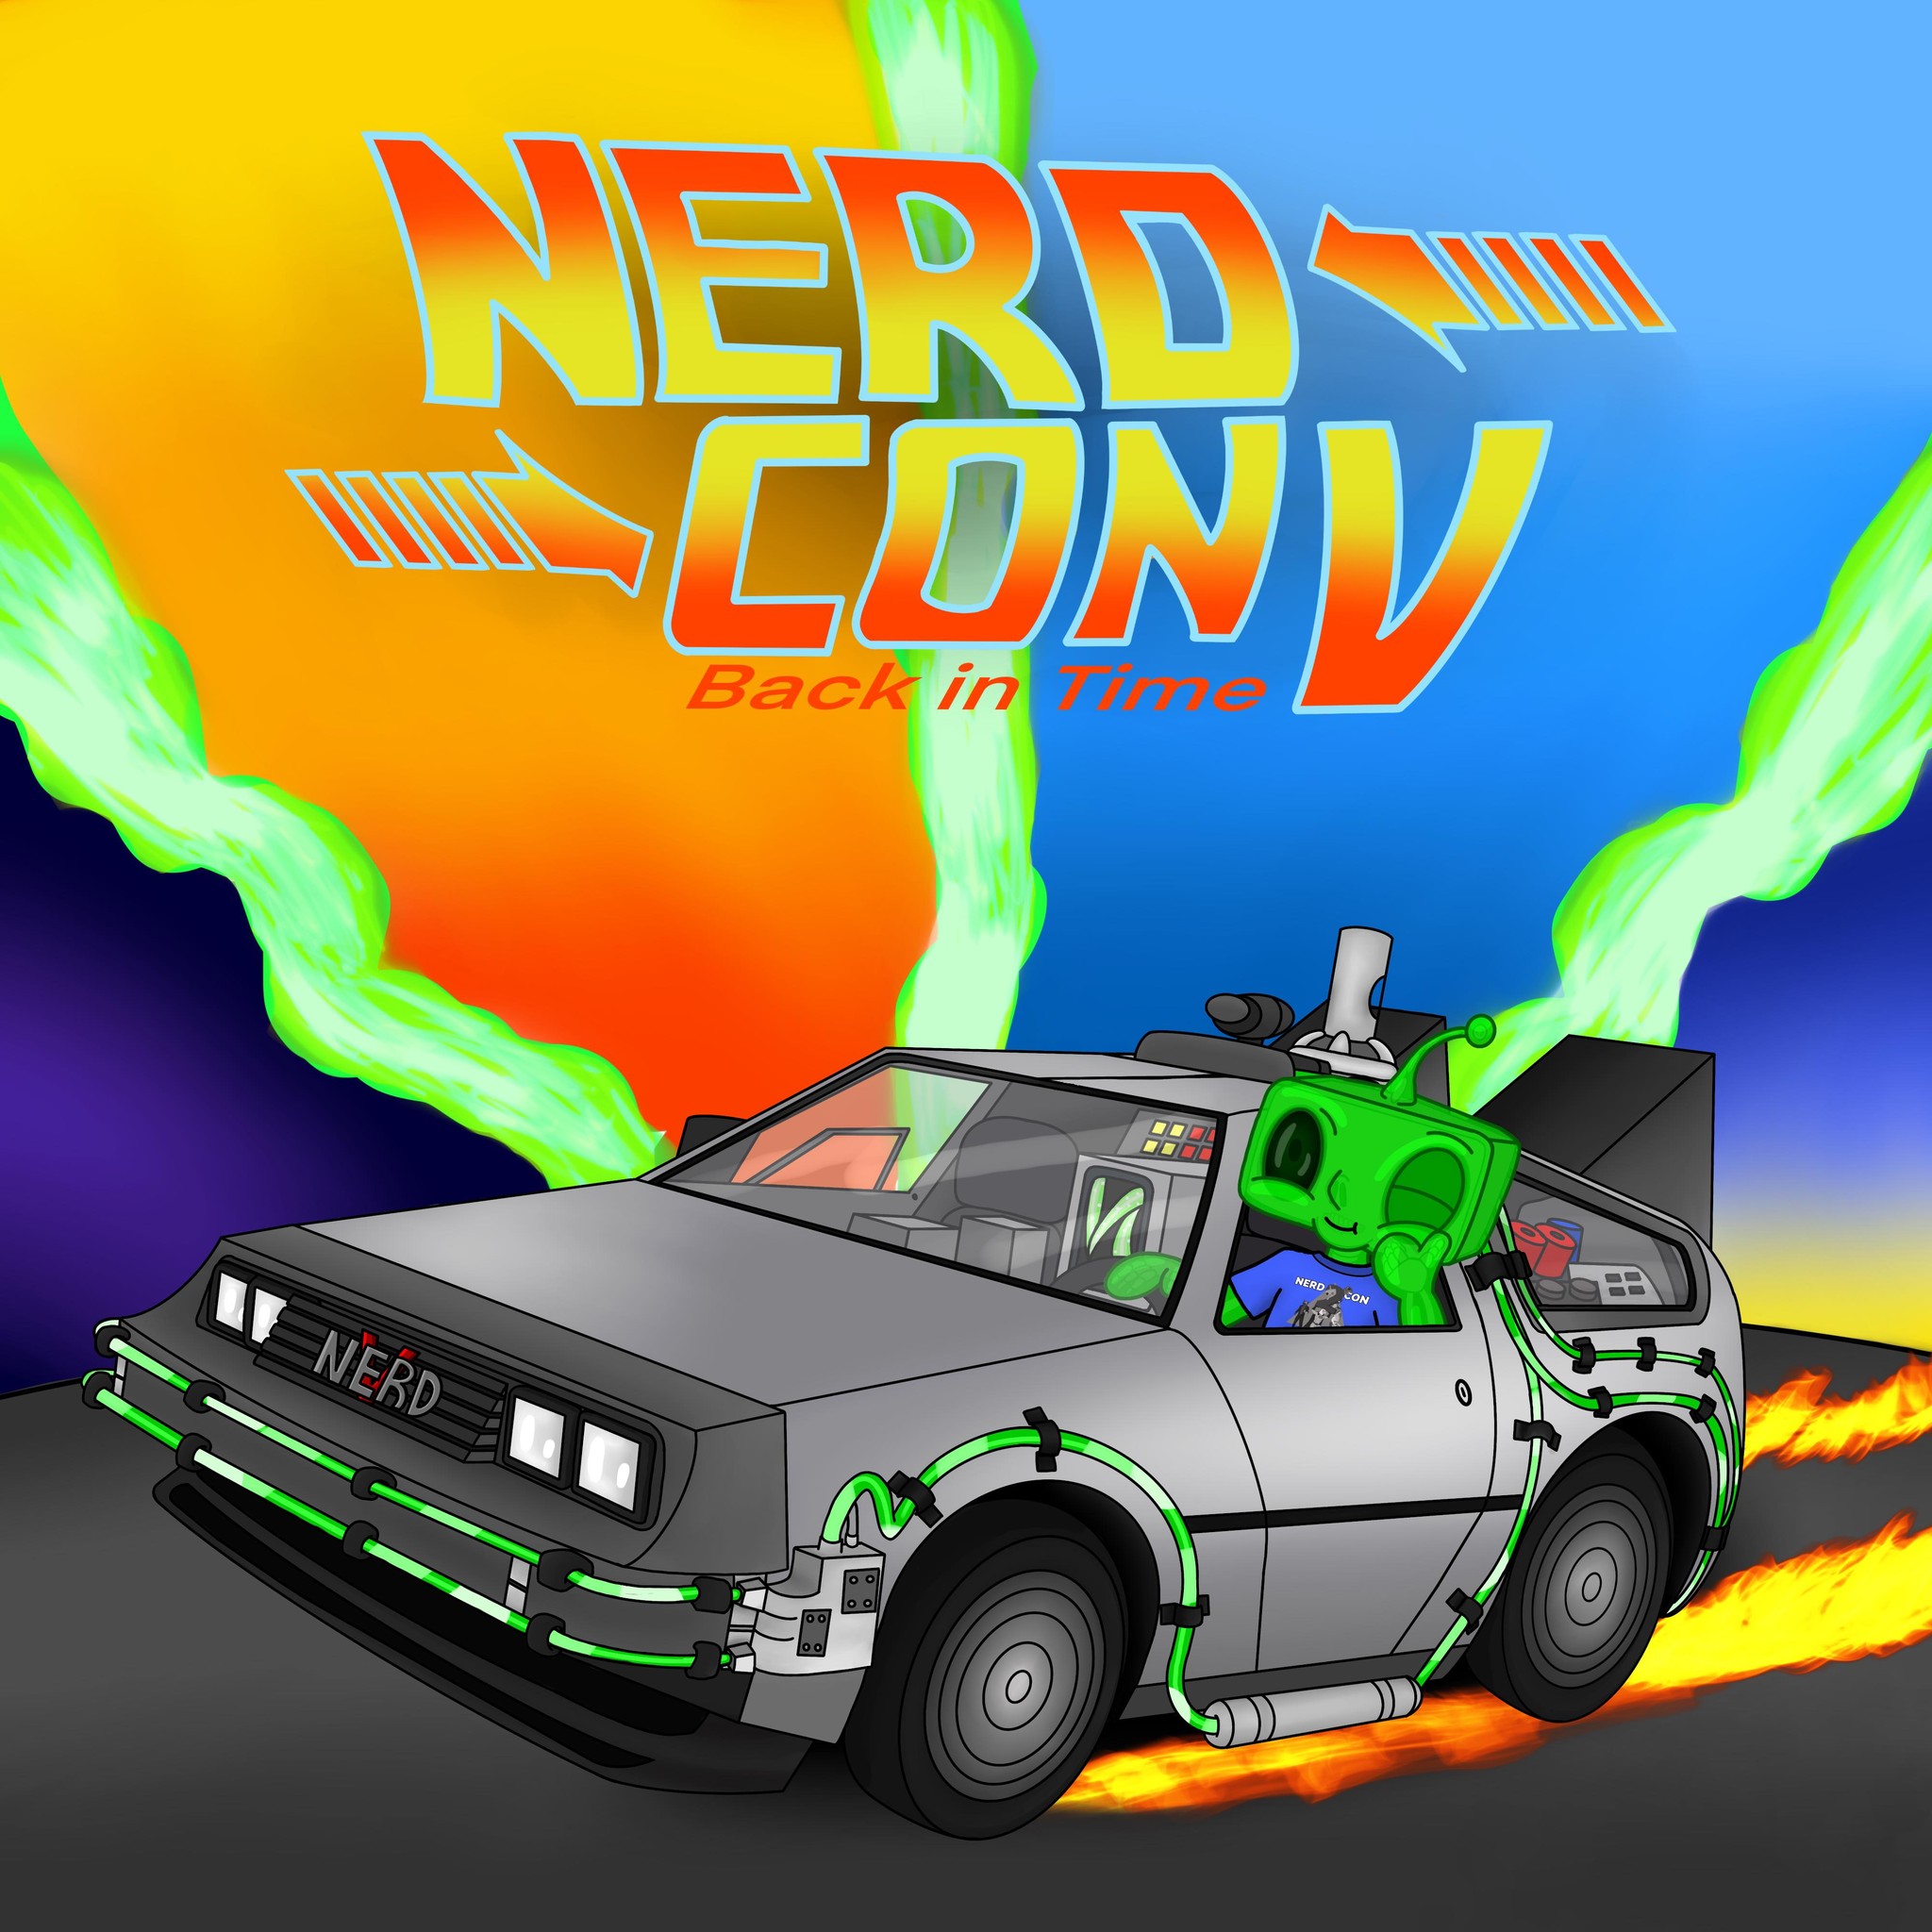 Nerd Con graphic depicting an alien in a vehicle giving a thumbs up gesture with flames coming off of the wheels